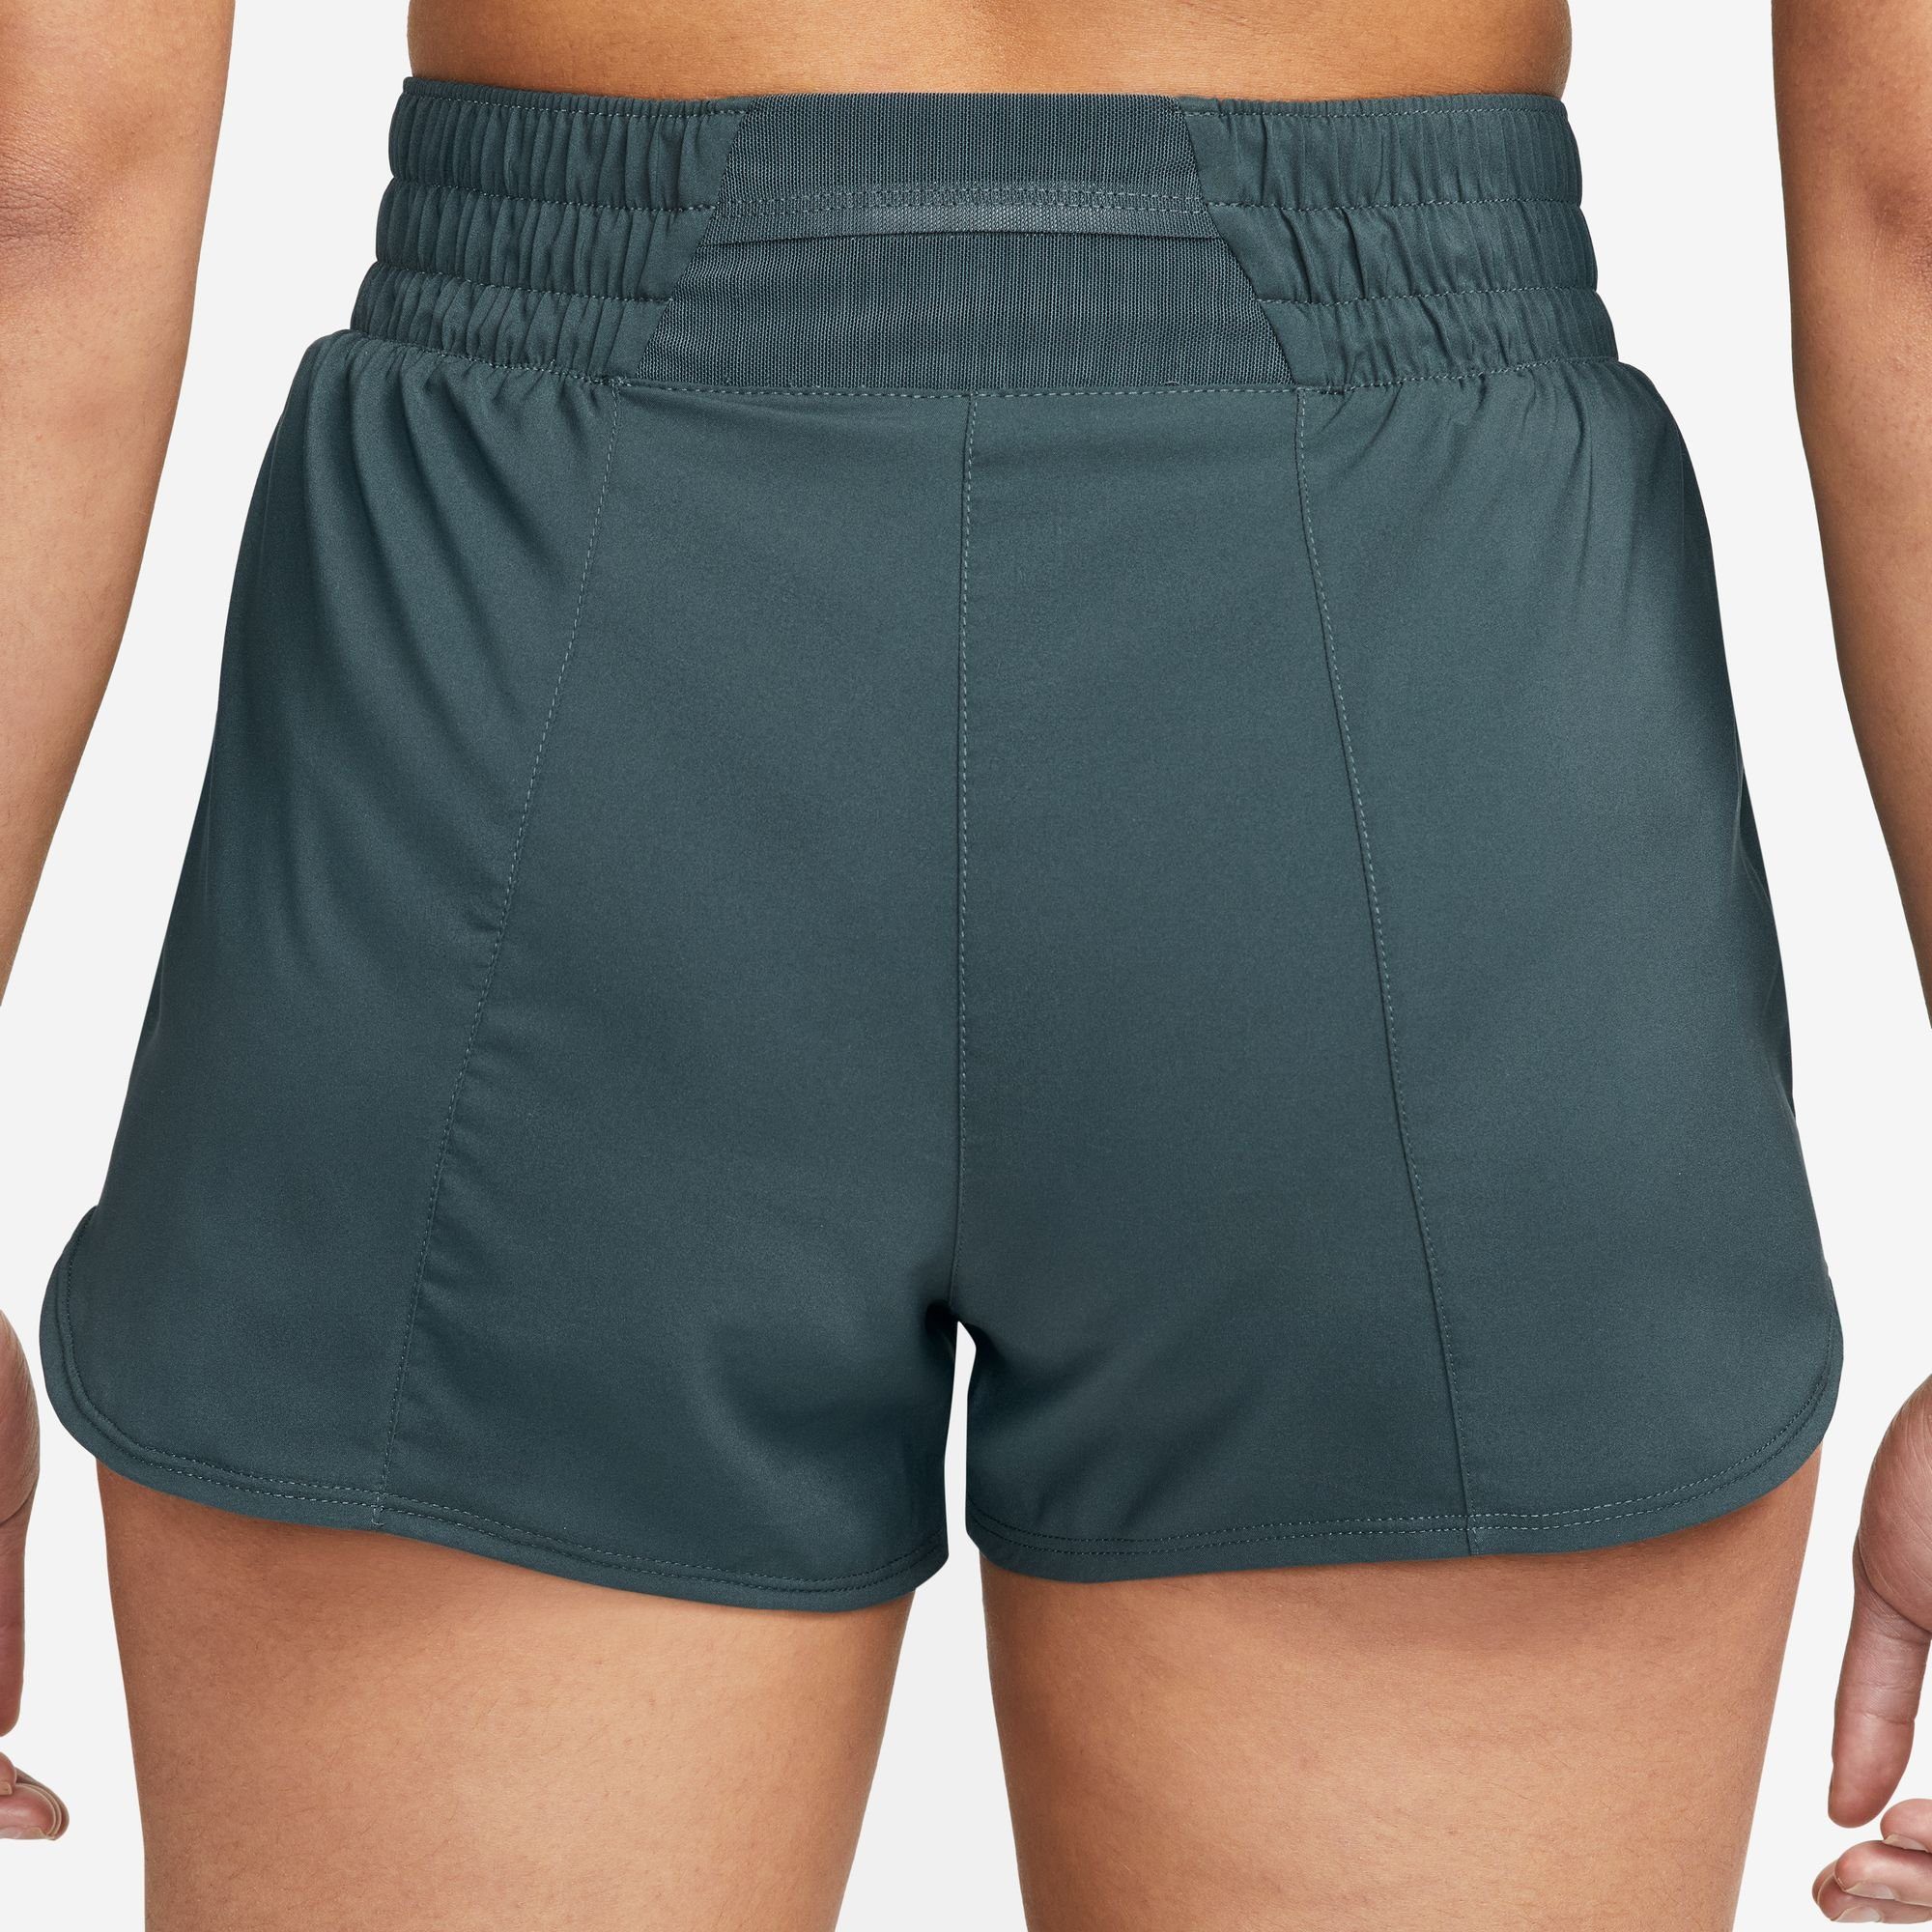 Nike DRI-FIT DEEP SILV ONE BRIEF-LINED SHORTS WOMEN'S JUNGLE/REFLECTIVE Trainingsshorts MID-RISE